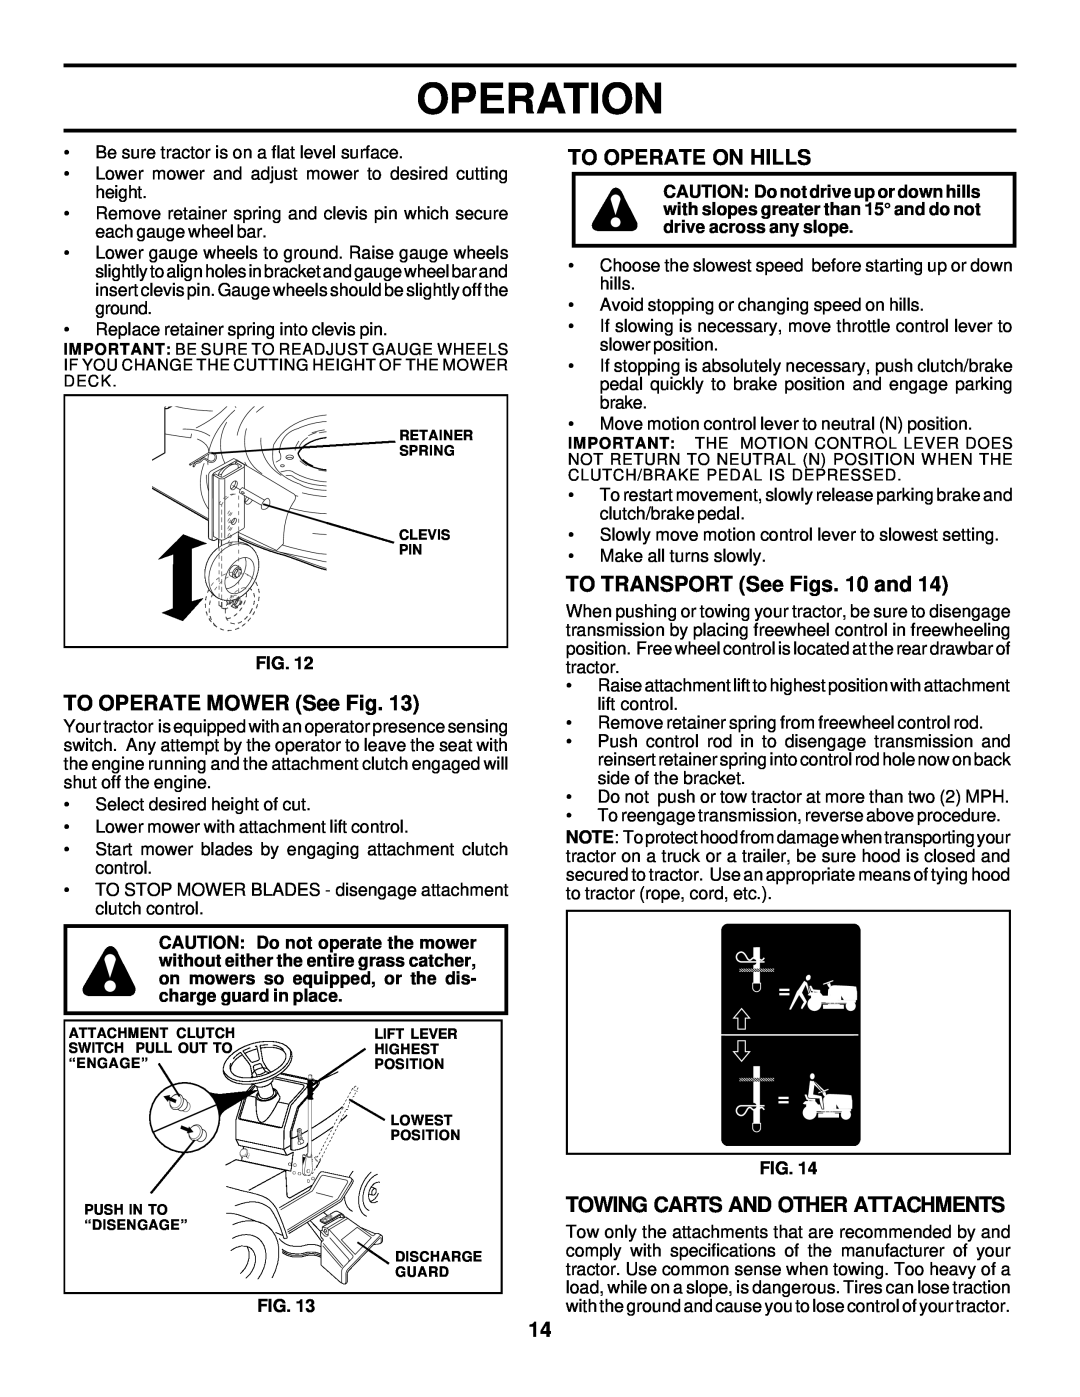 Husqvarna GTH225 owner manual TO OPERATE MOWER See Fig, To Operate On Hills, TO TRANSPORT See Figs. 10 and, Operation 